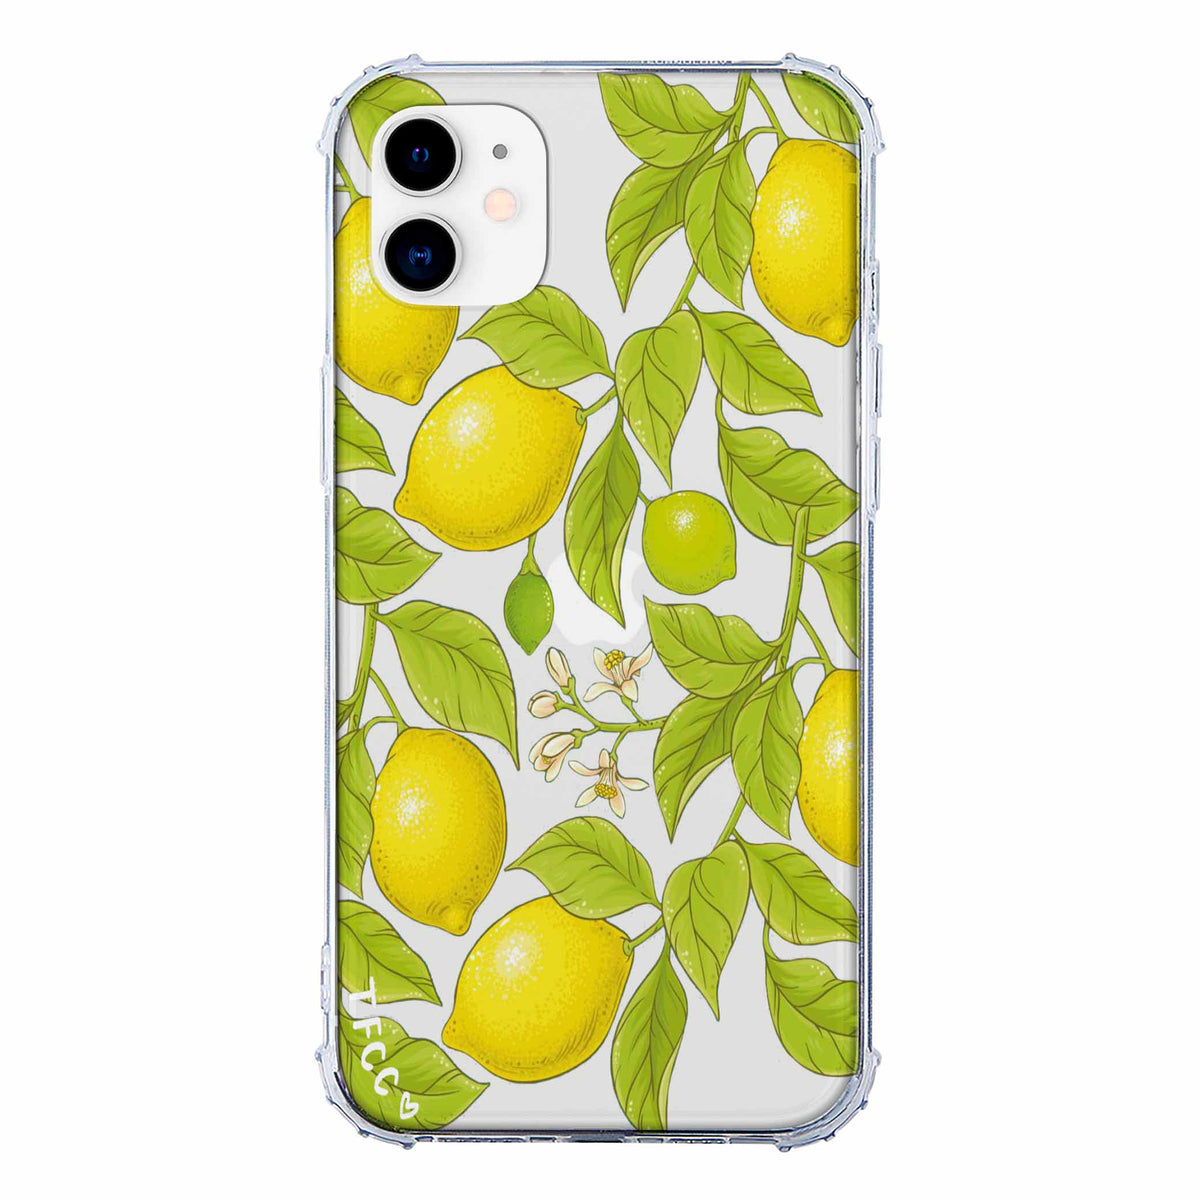 Lemon Clear Case - thefonecasecompany